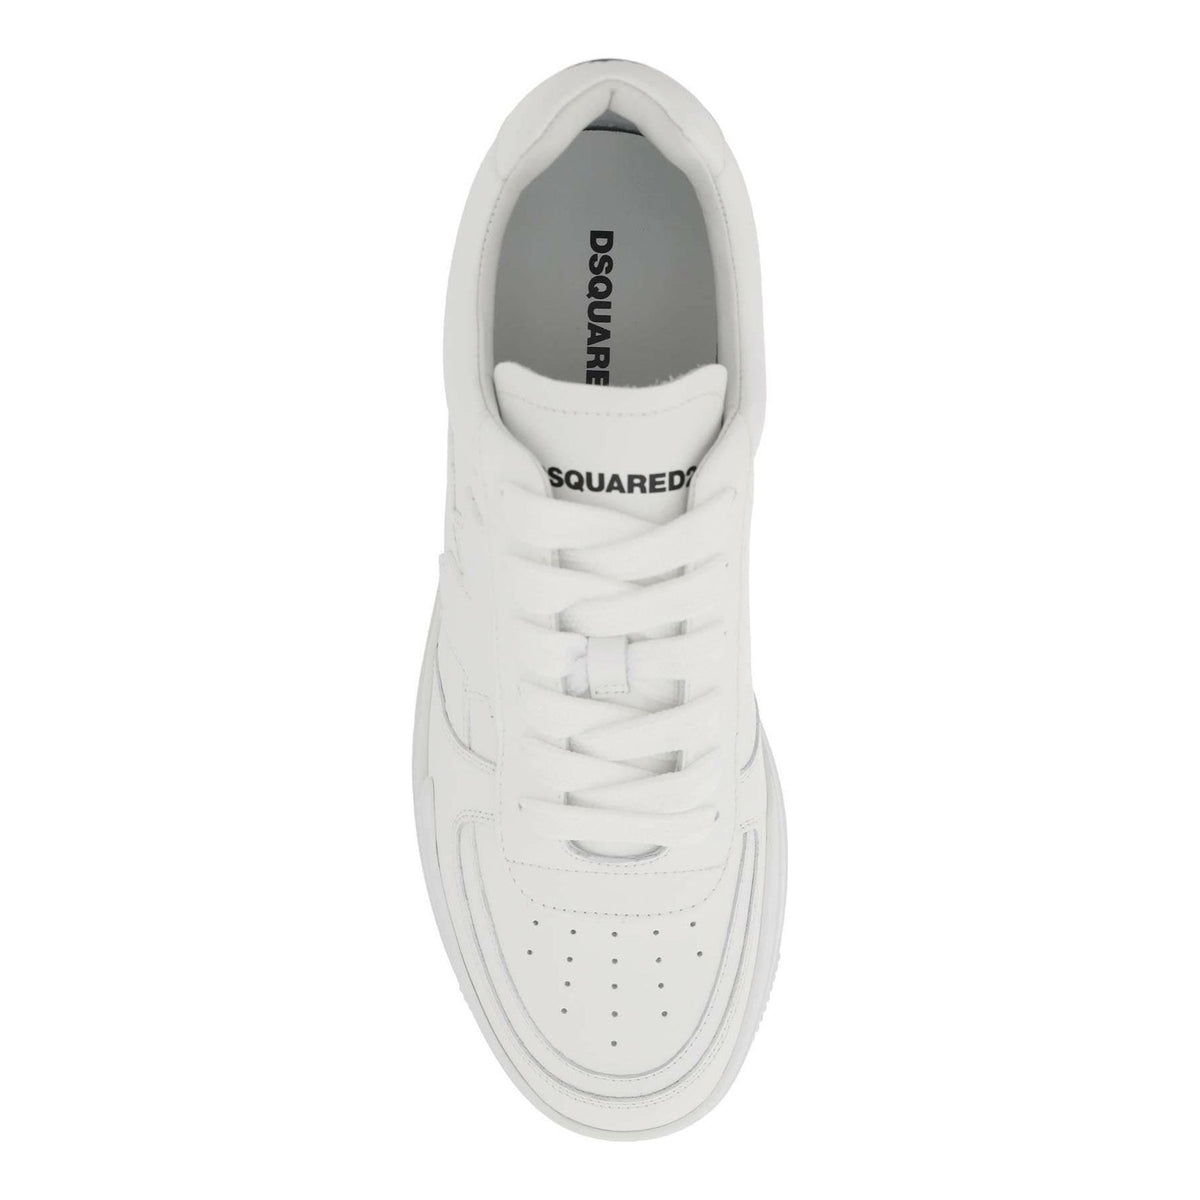 DSQUARED2 - White Leather Canadian Sneakers With Canadian Leaf Detail - JOHN JULIA